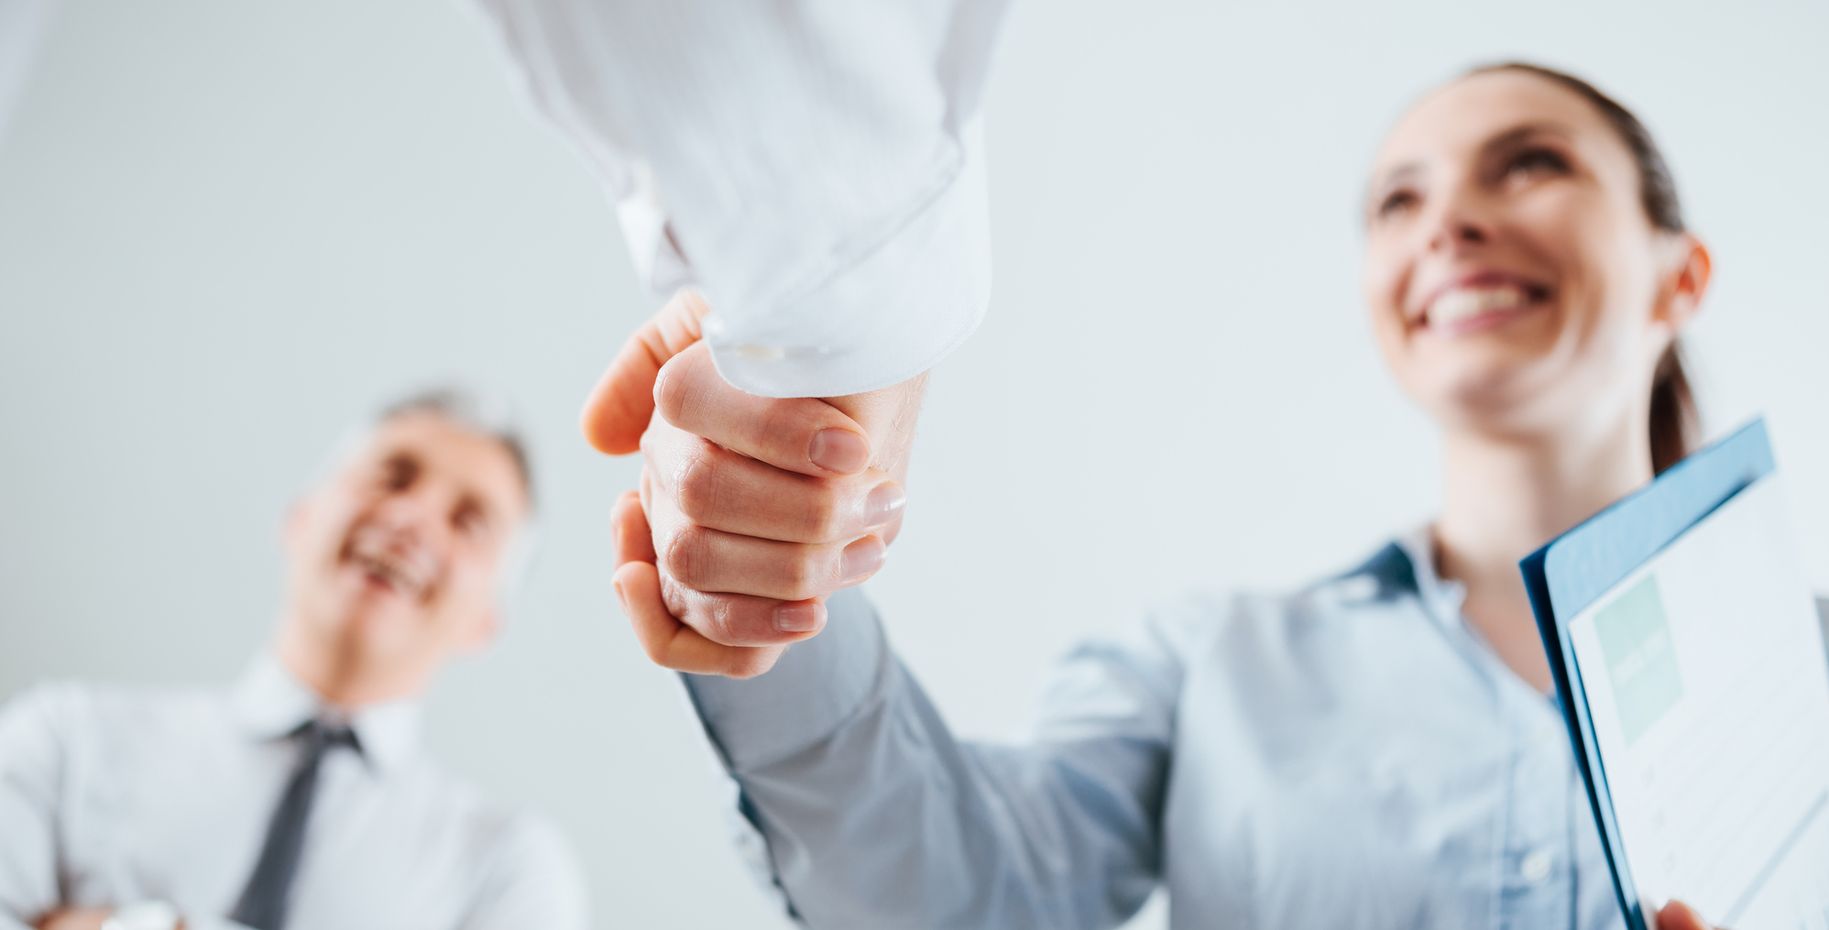 Confident business people shaking hands and woman smiling, recruitment and agreement concept